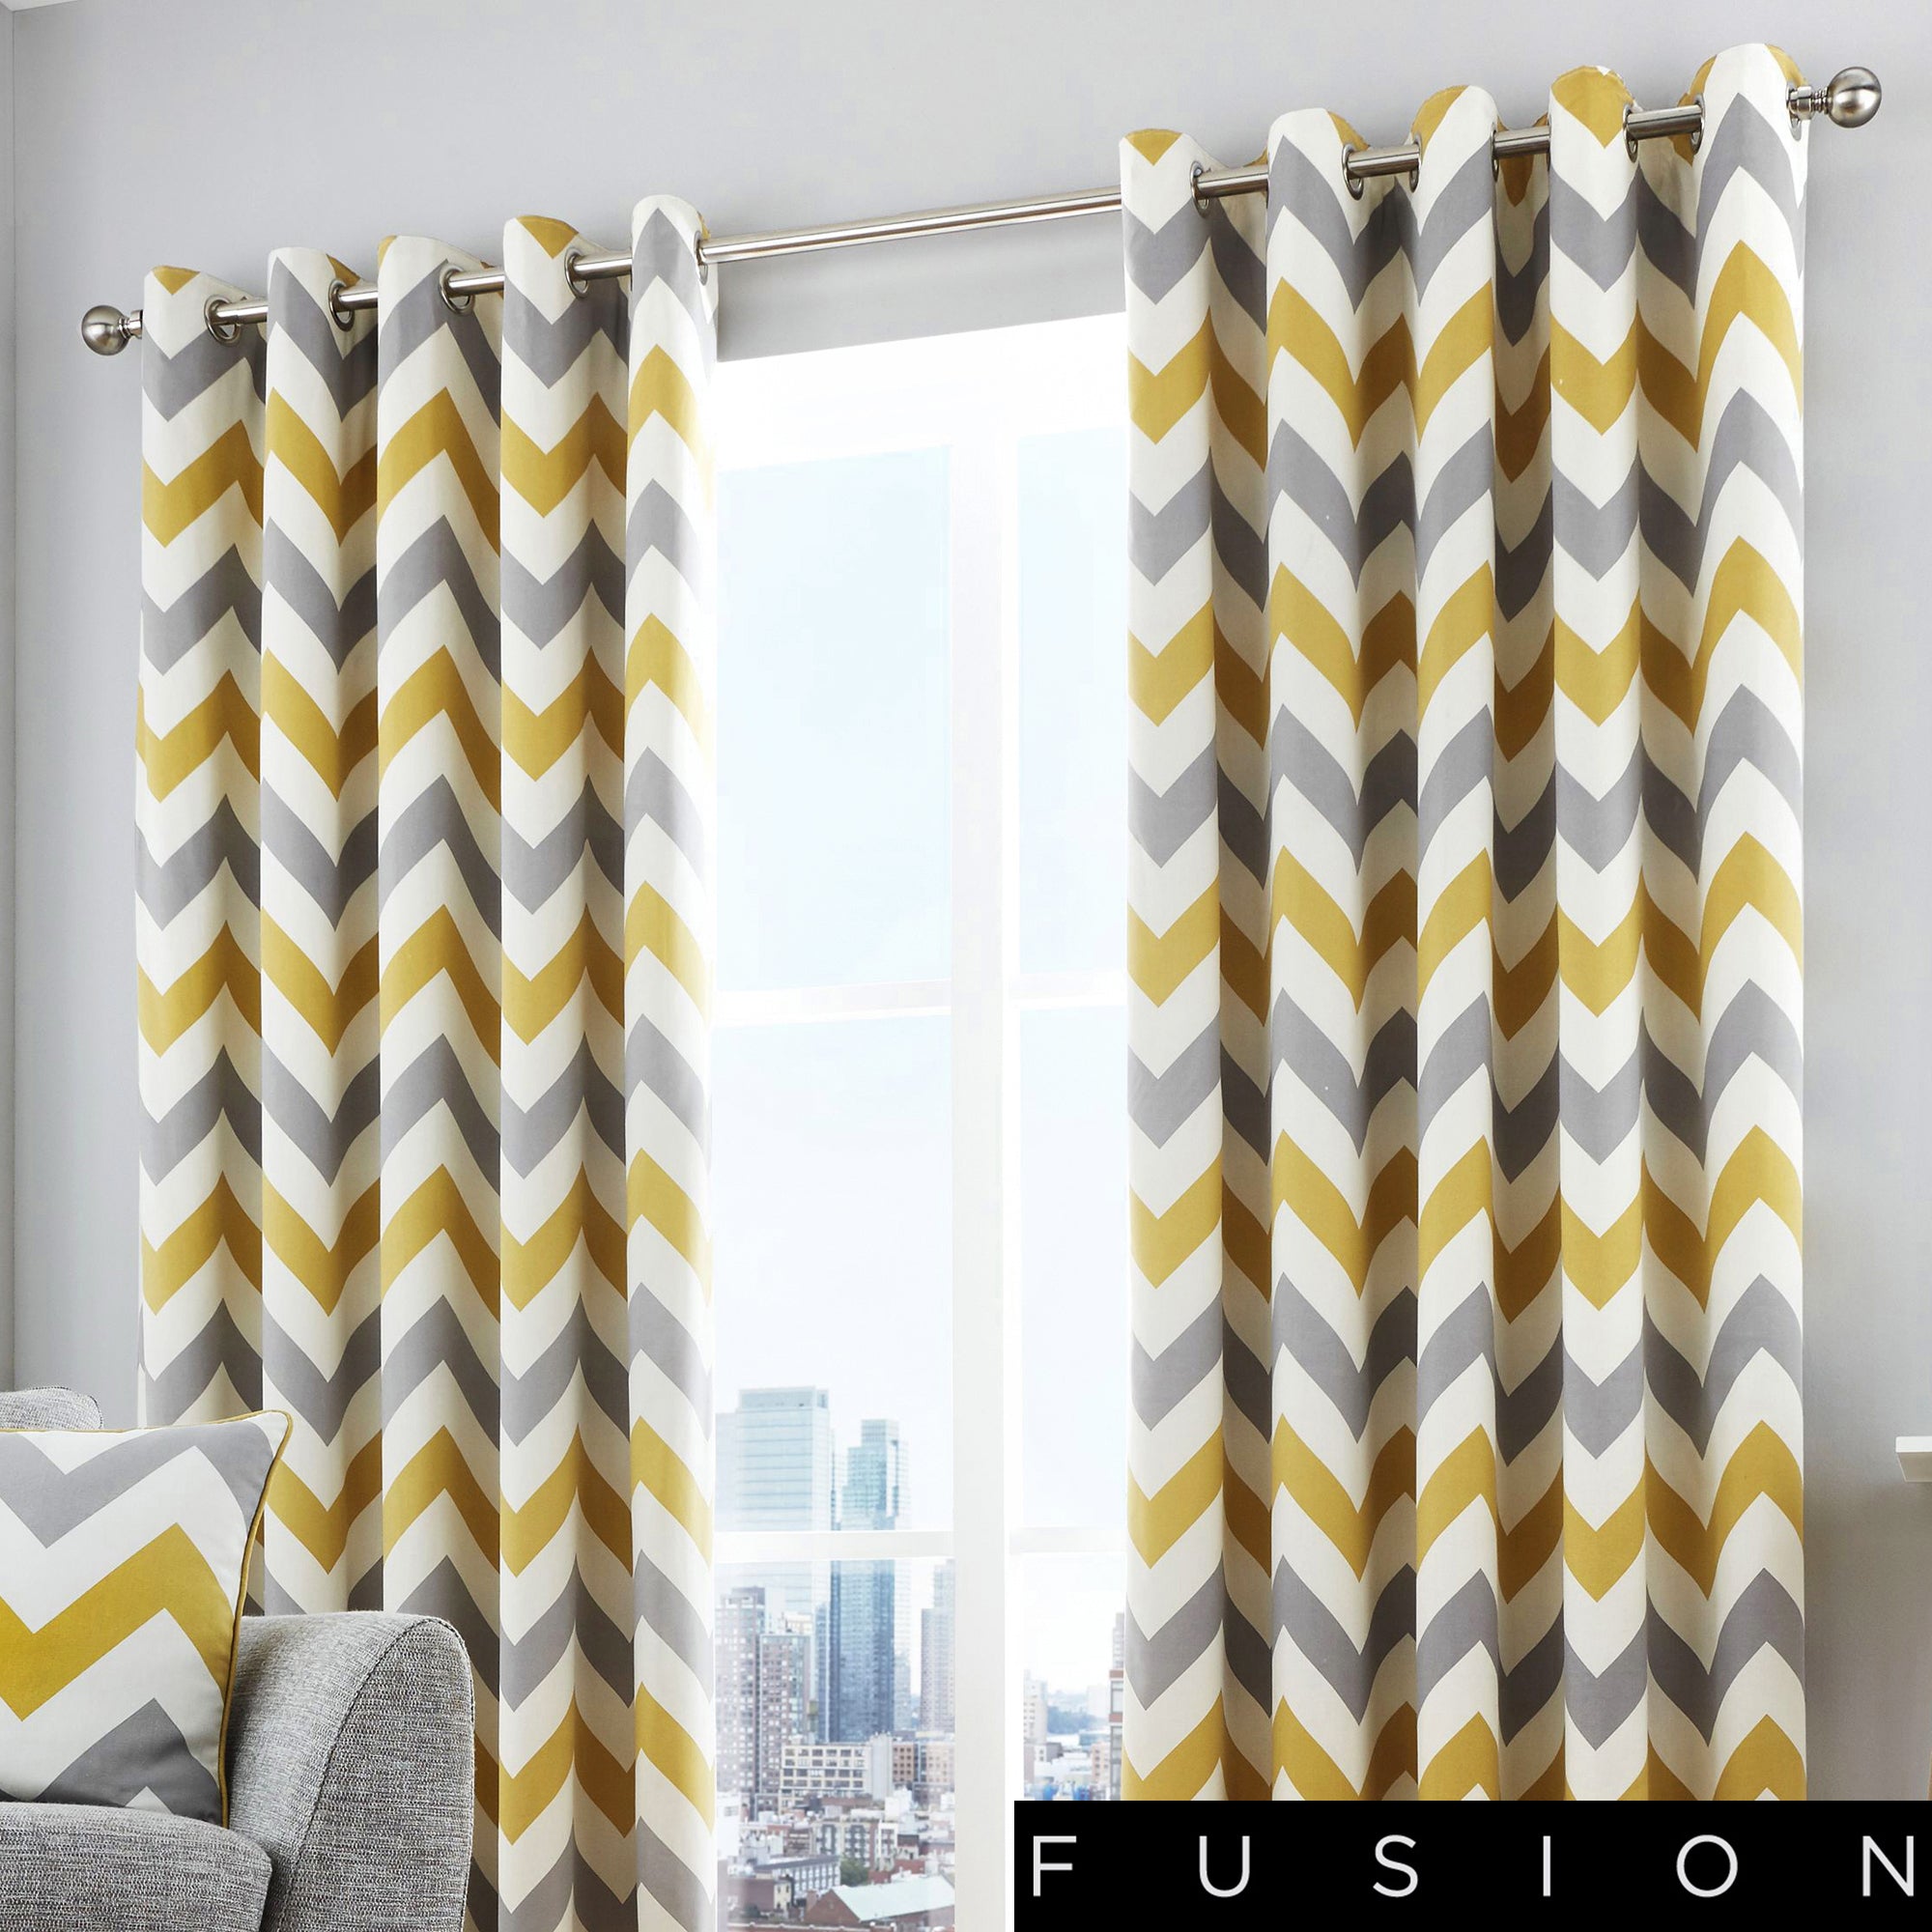 Chevron - 100% Cotton Lined Eyelet Curtains in Ochre - by Fusion